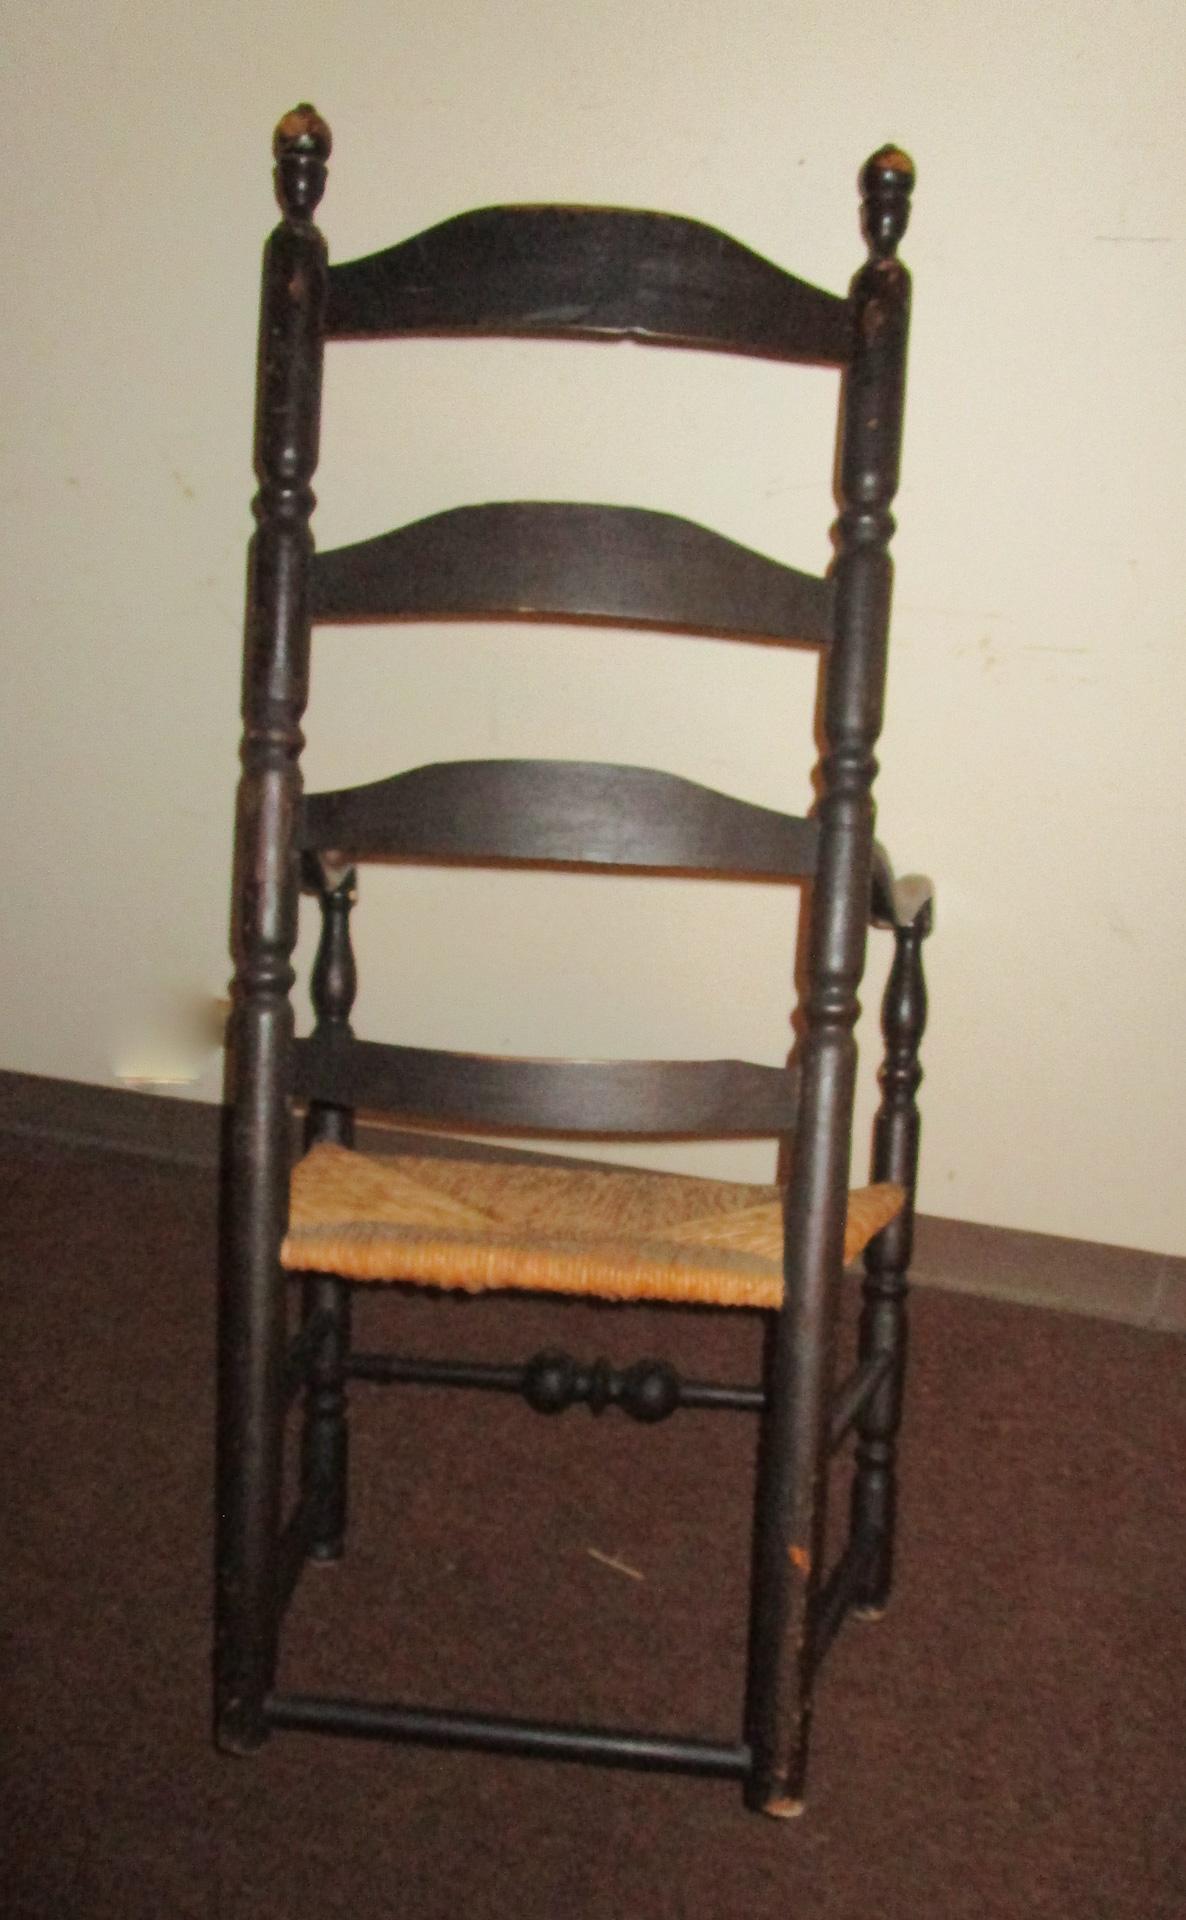 18thc American Stenciled Ladderback Chair with Rush Seat and Original Finish For Sale 4